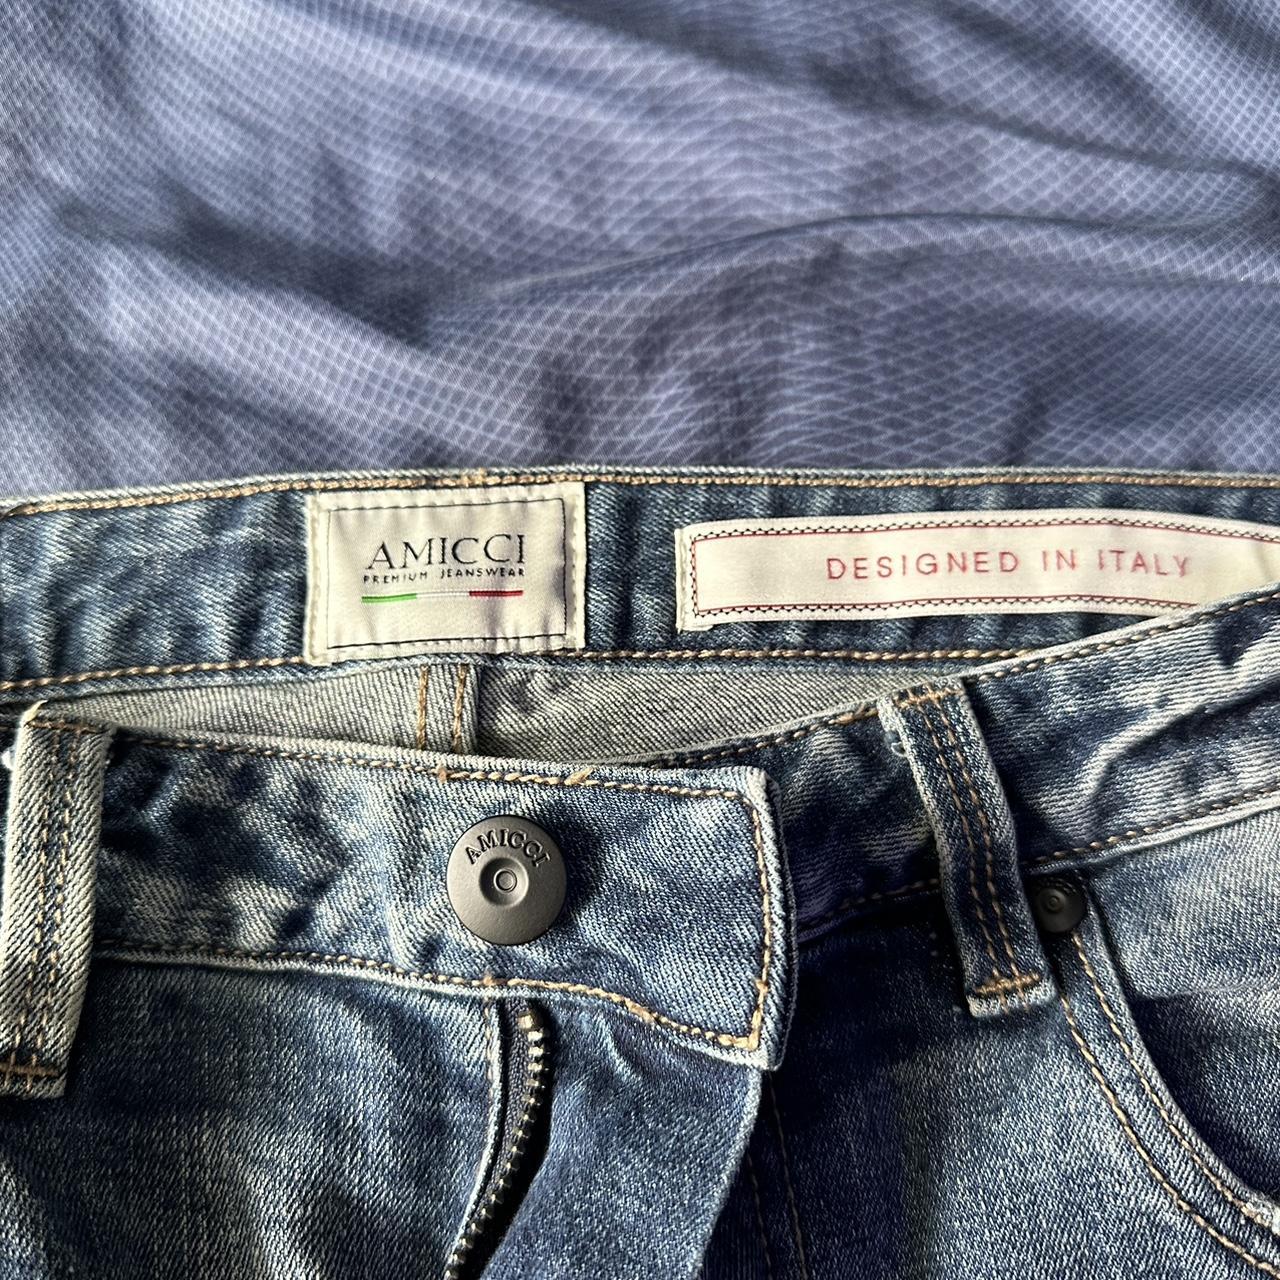 Amicci jeans in very good condition basically brand... - Depop